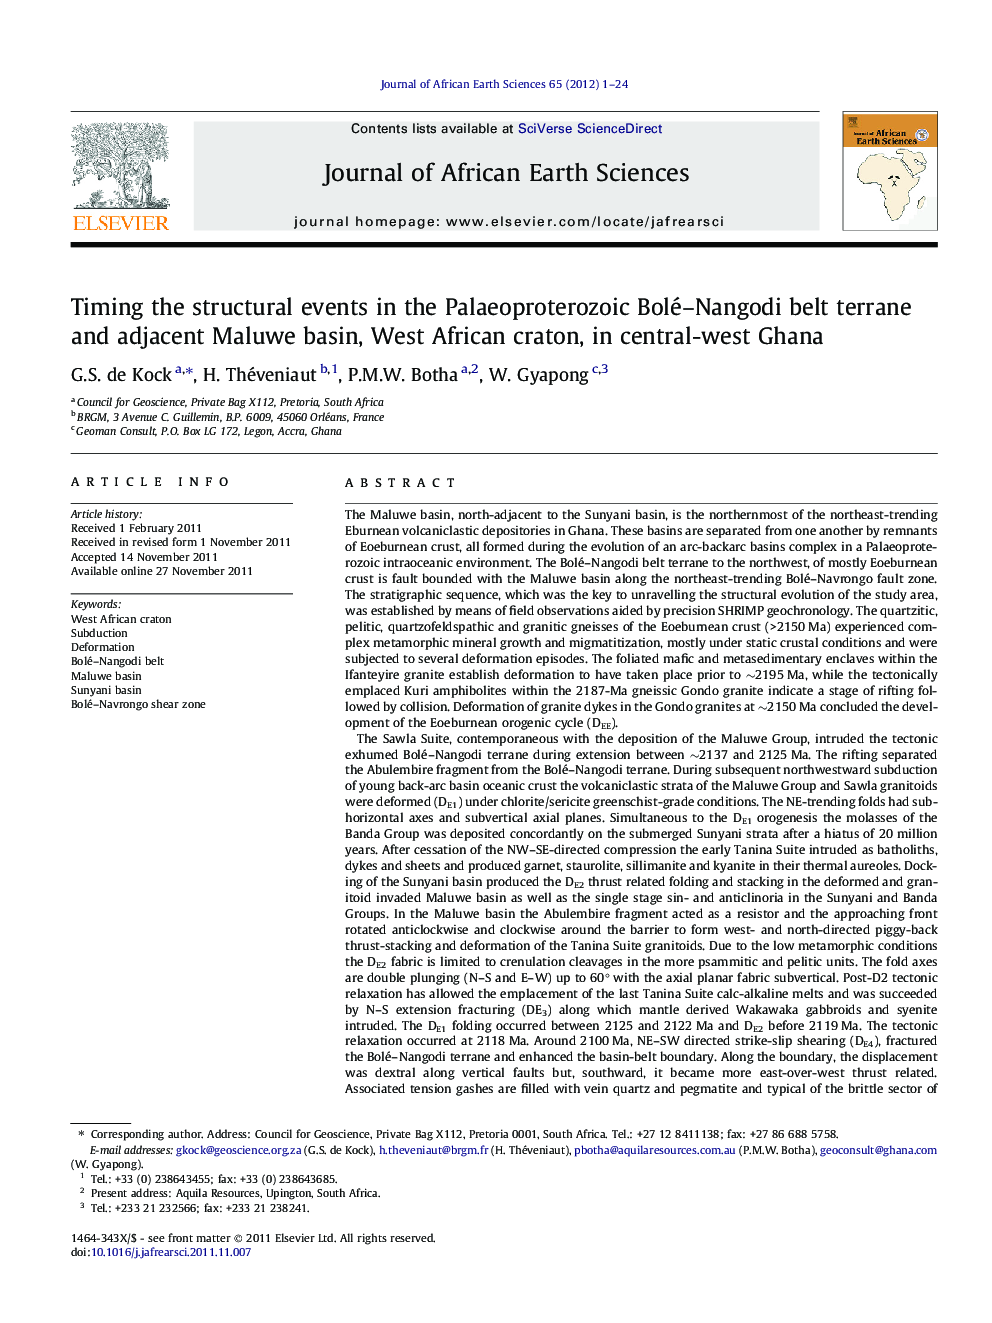 Timing the structural events in the Palaeoproterozoic Bolé-Nangodi belt terrane and adjacent Maluwe basin, West African craton, in central-west Ghana